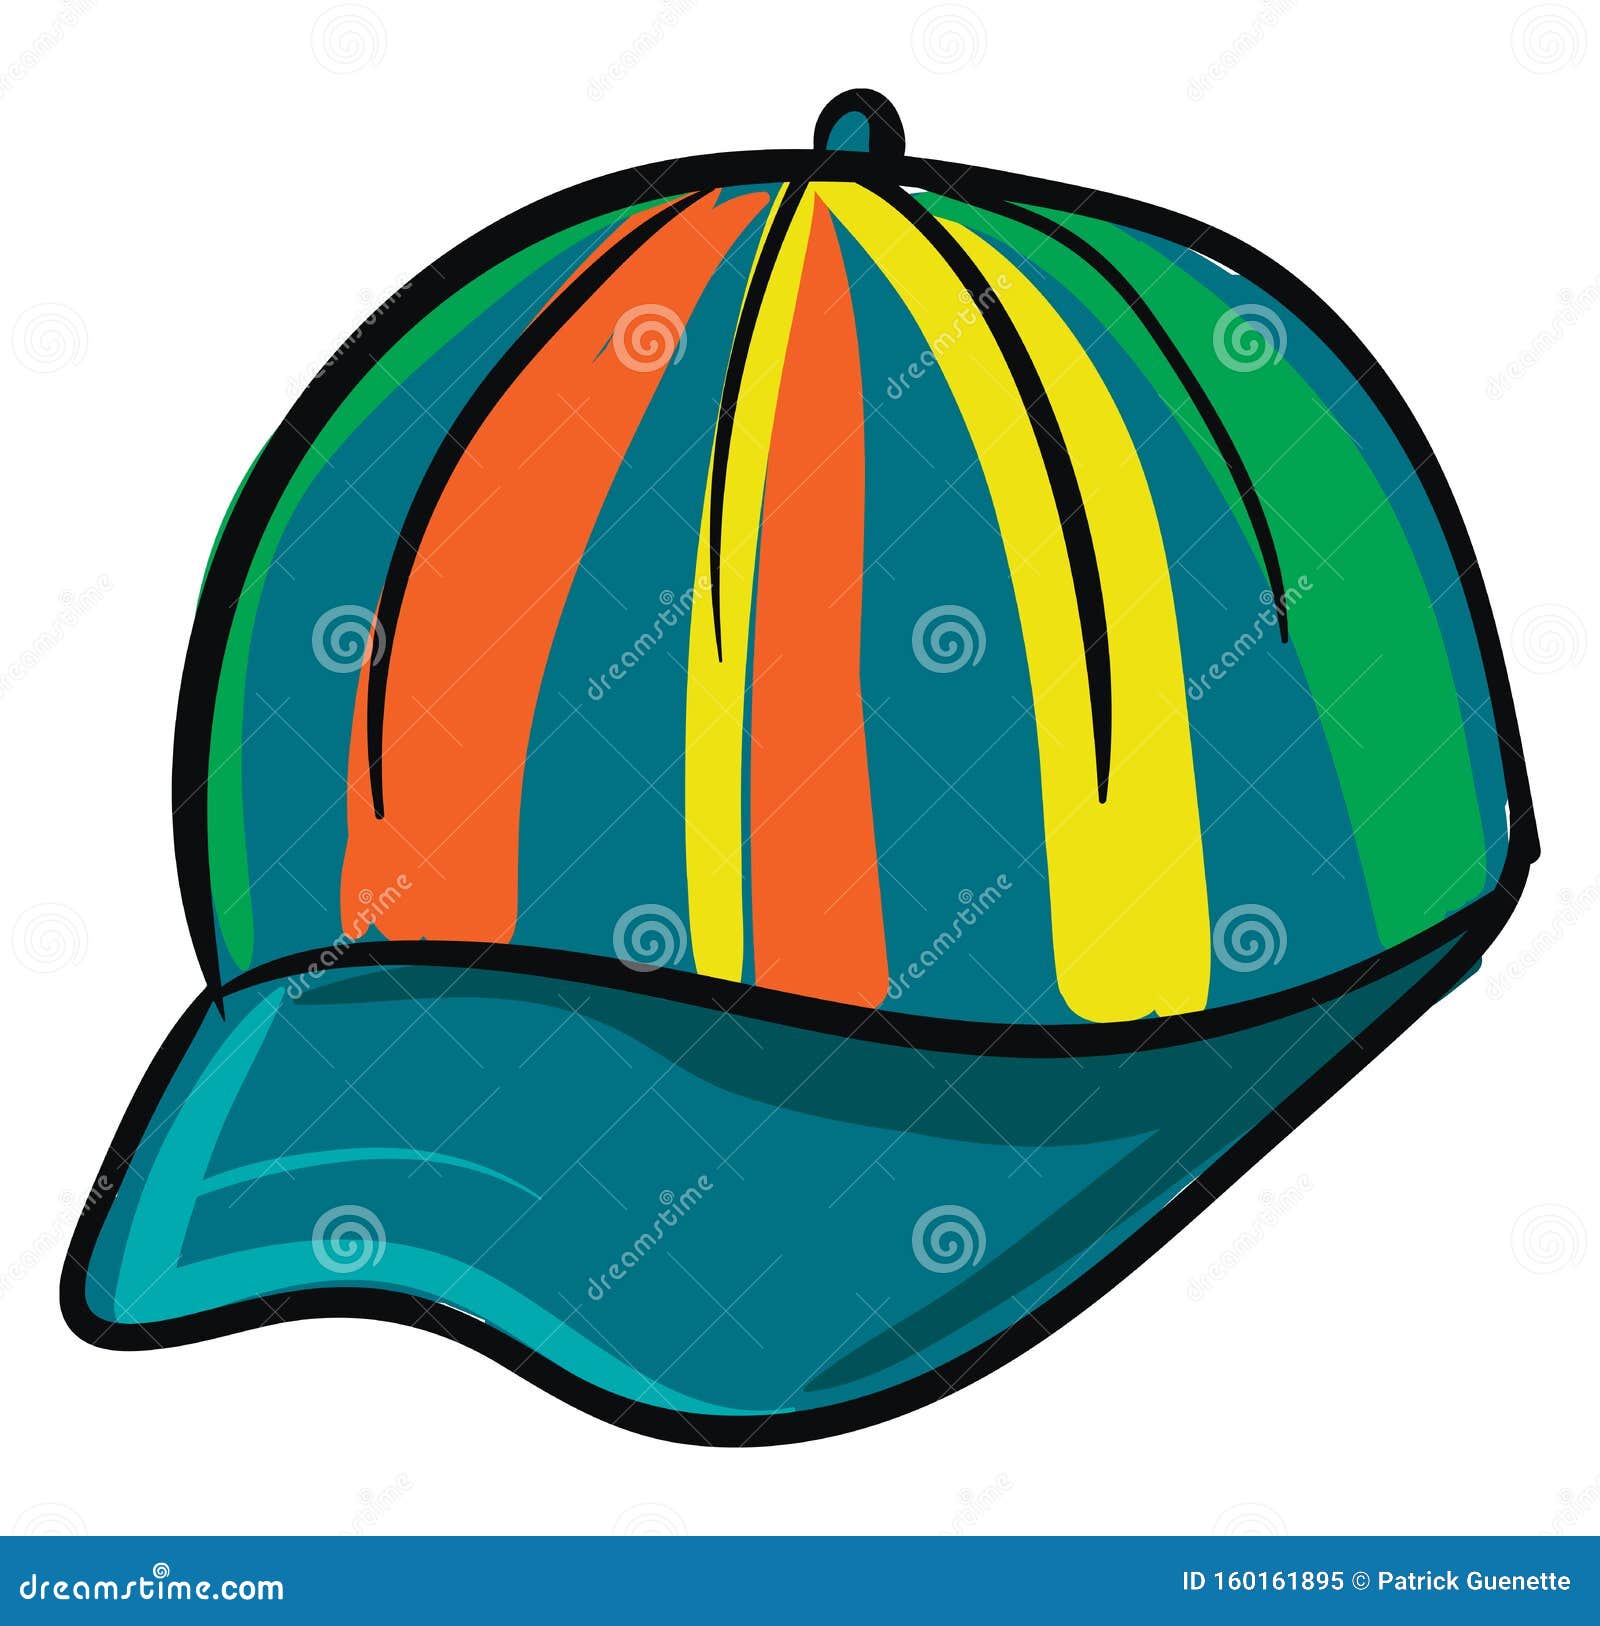 Clipart of a Multi-colored Big Summer Cap for Men/women Set Isolated on  White Background, Vector or Color Illustration Stock Vector - Illustration  of vector, colored: 160161895